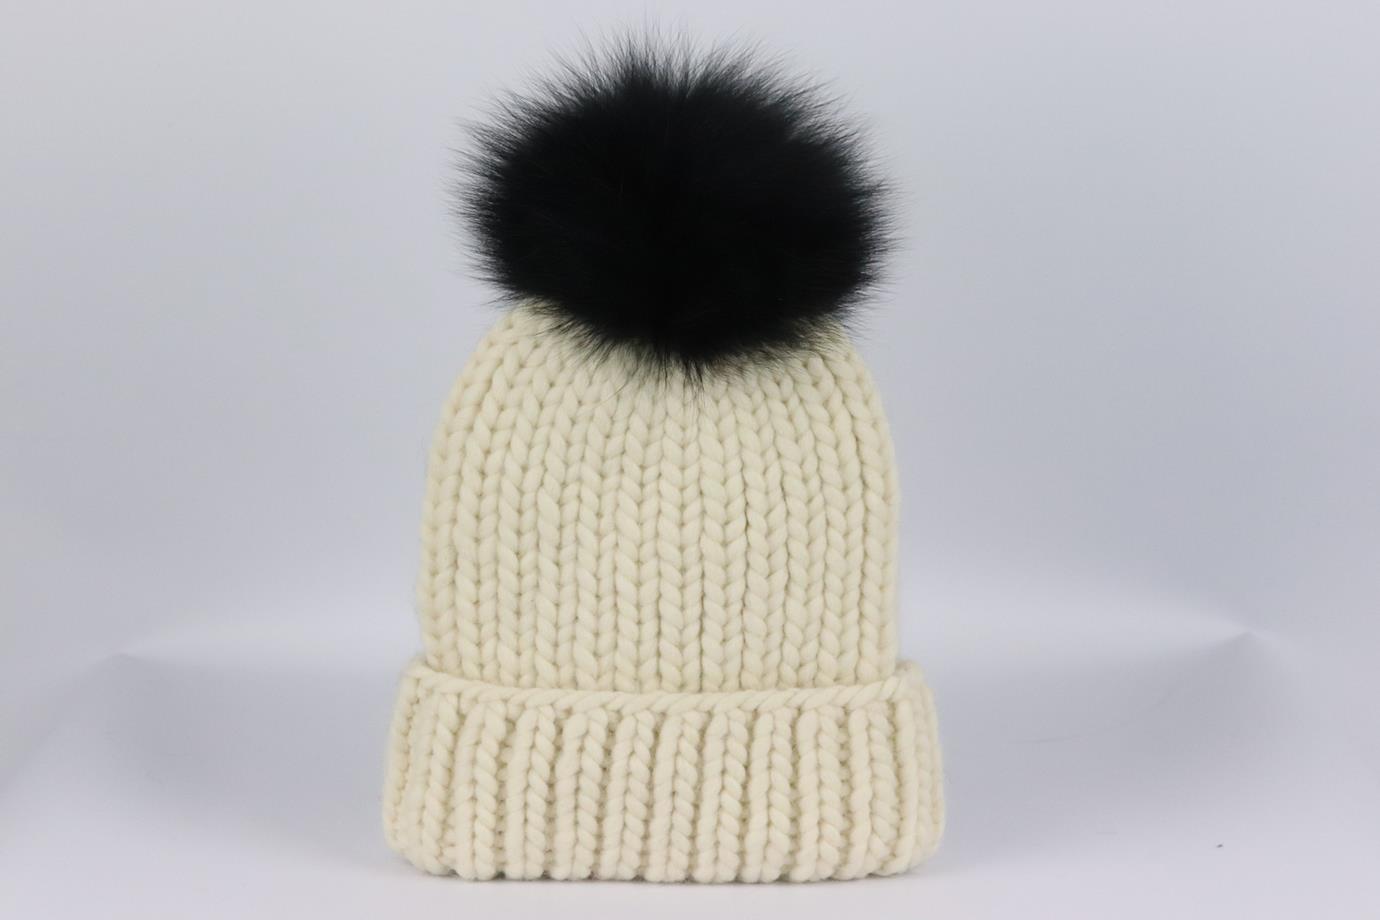 EUGENIA KIM FOX FUR TRIMMED RIBBED WOOL BLEND BEANIE ONE SIZE